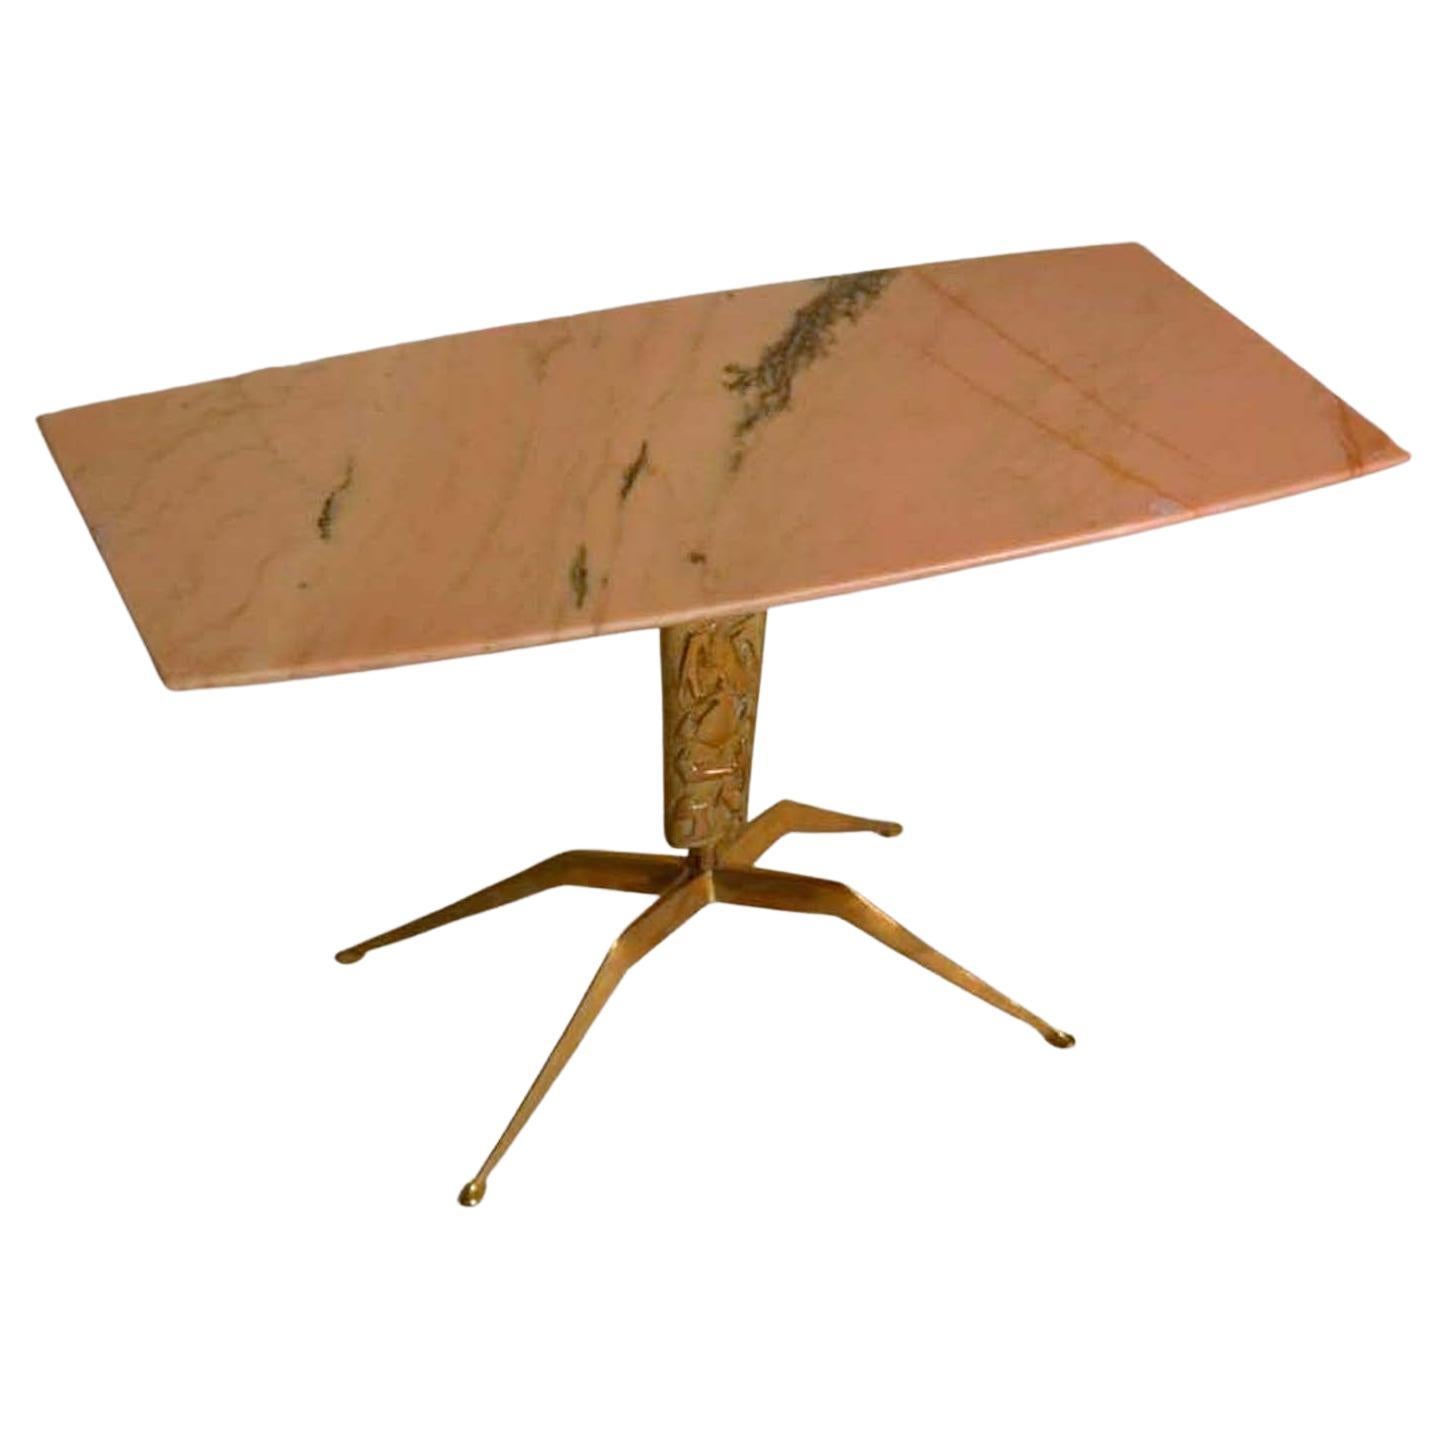 Rectangular coffee table with pink marble top with black veins supported by a sculpted cast brass base with a relief of figures and four spider legs on oval feet. The figures on the leg are abstracted in a typical 1950s style and tell the story of